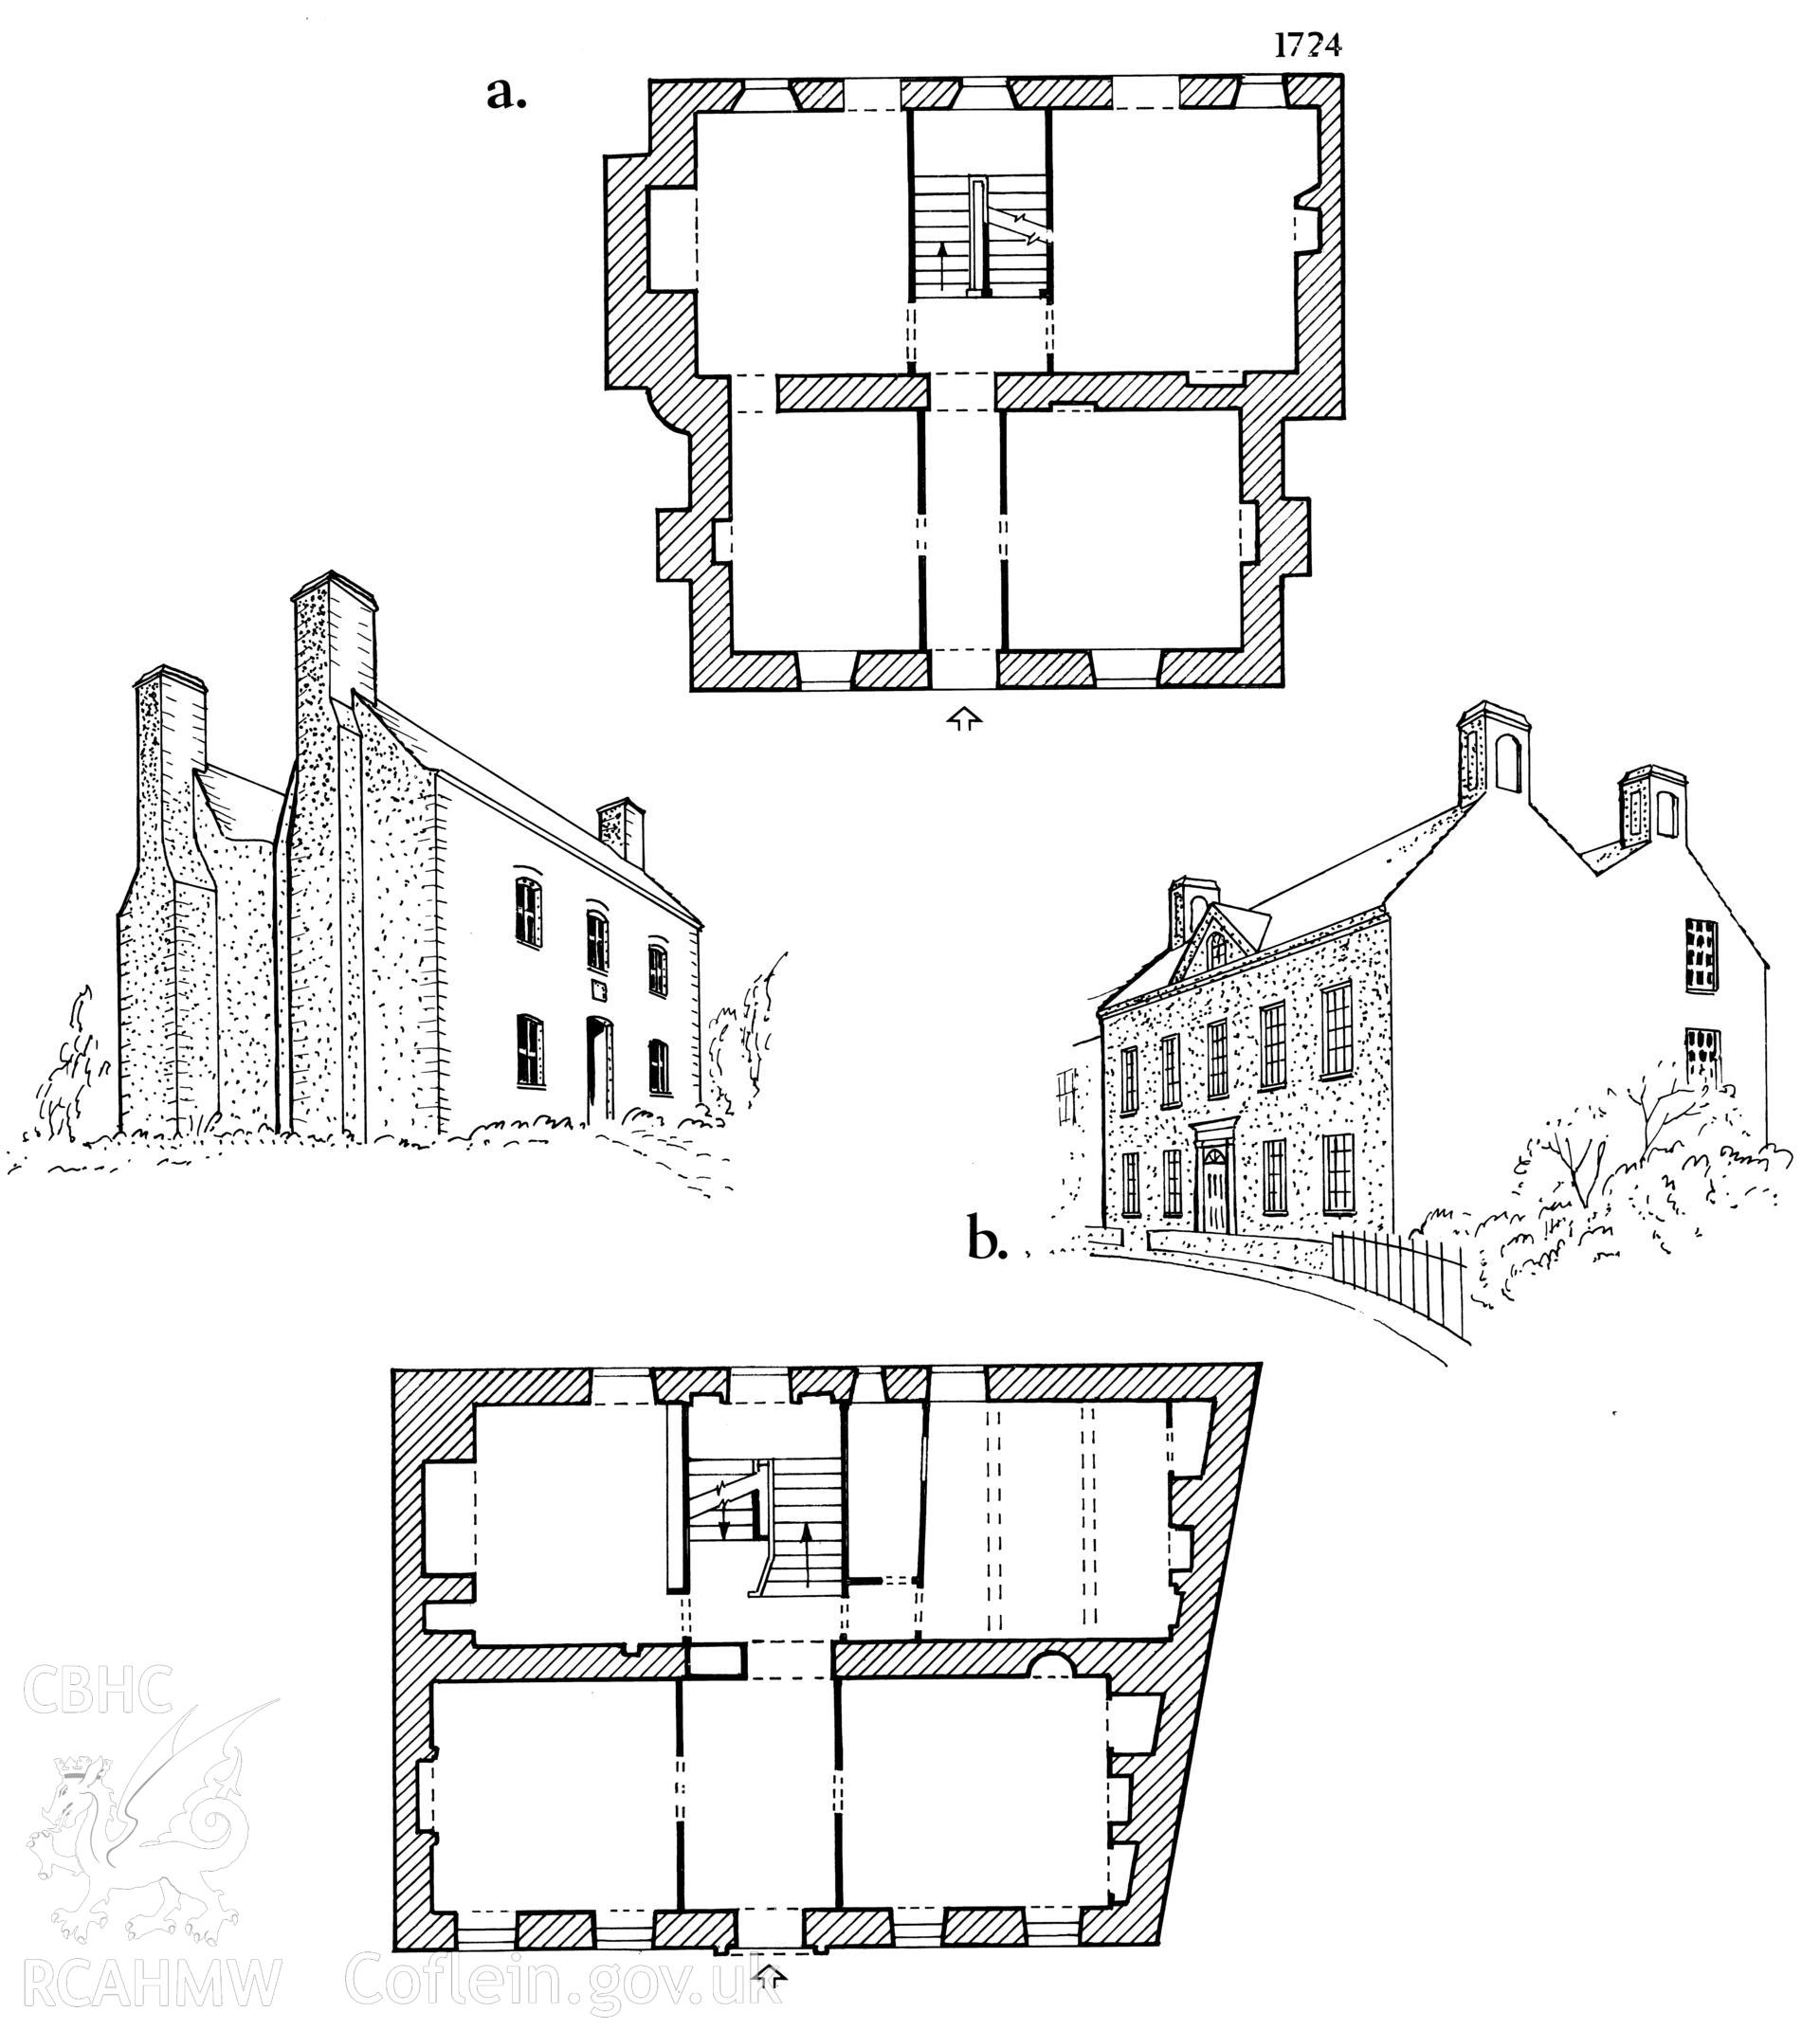 Multi site RCAHMW drawing, 2 sites, (ink on linen) showing plan and elevation of Great  House, Laugharne and Fforest, Brechfa. Published in Houses of the Welsh Countryside, fig 150.